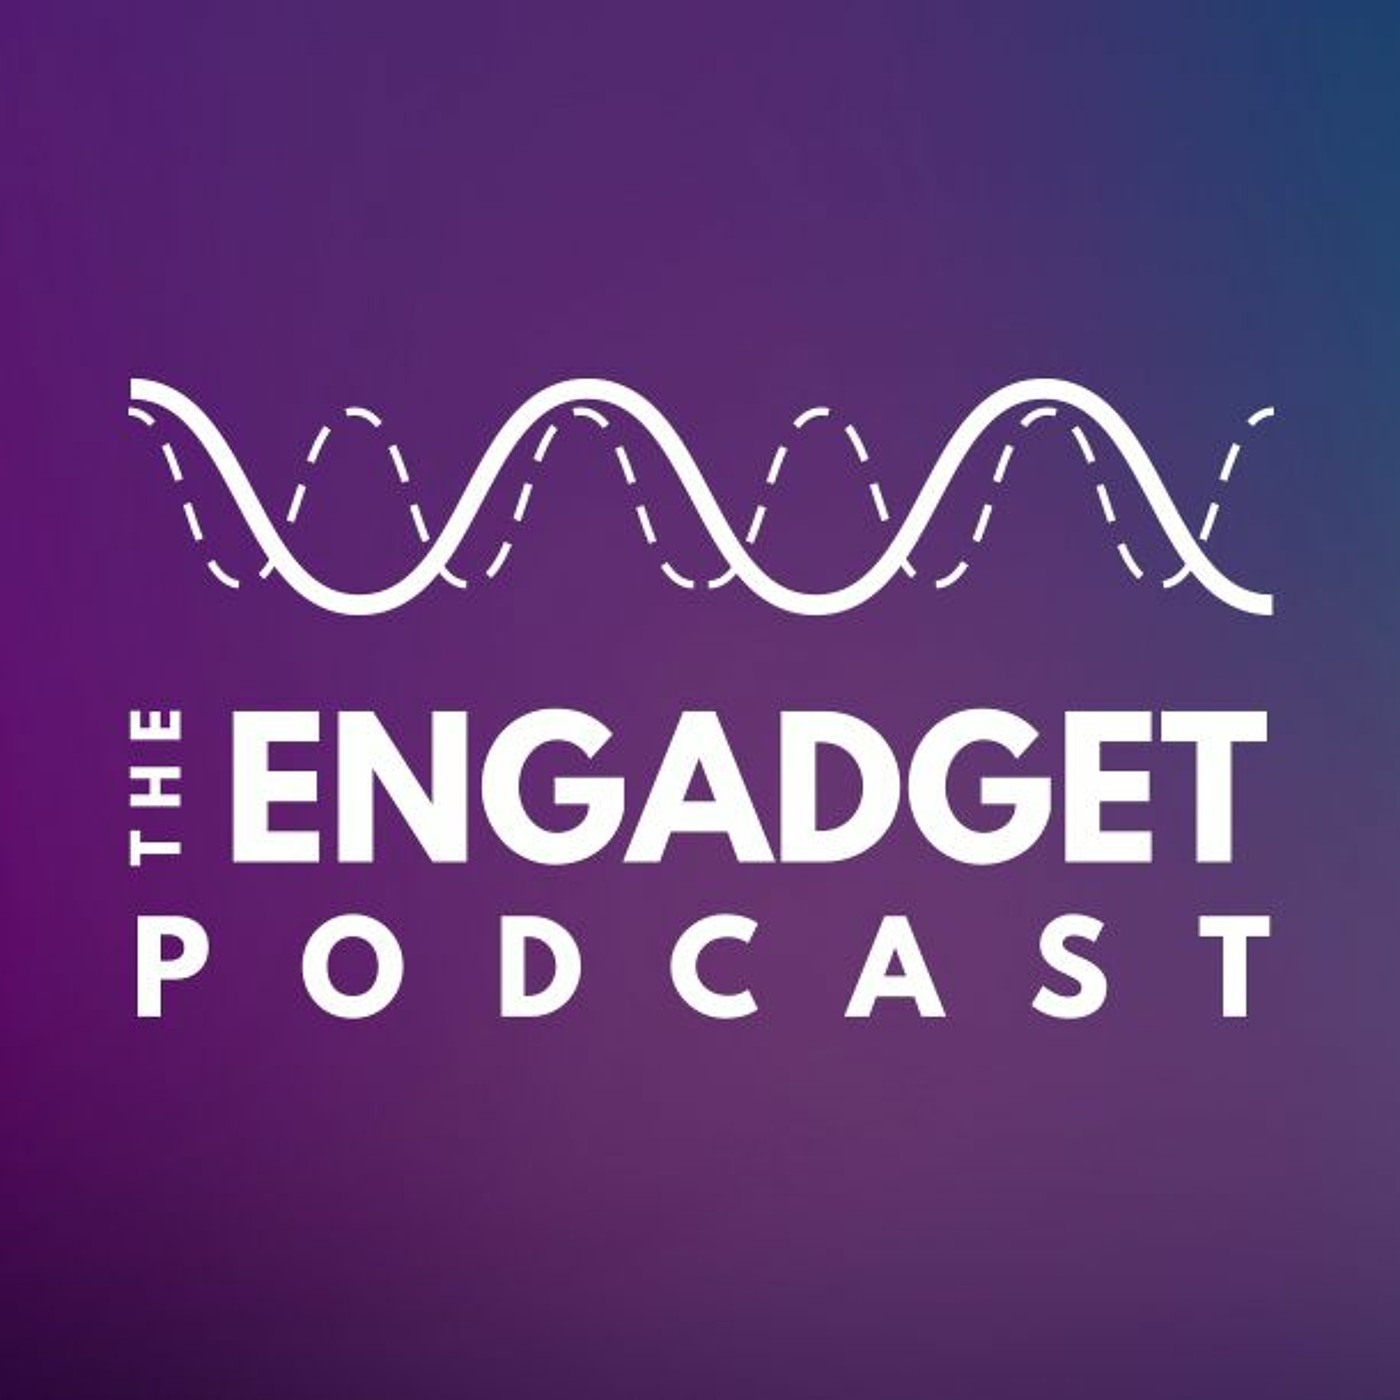 The Engadget Podcast Ep 32:  North and South of the River